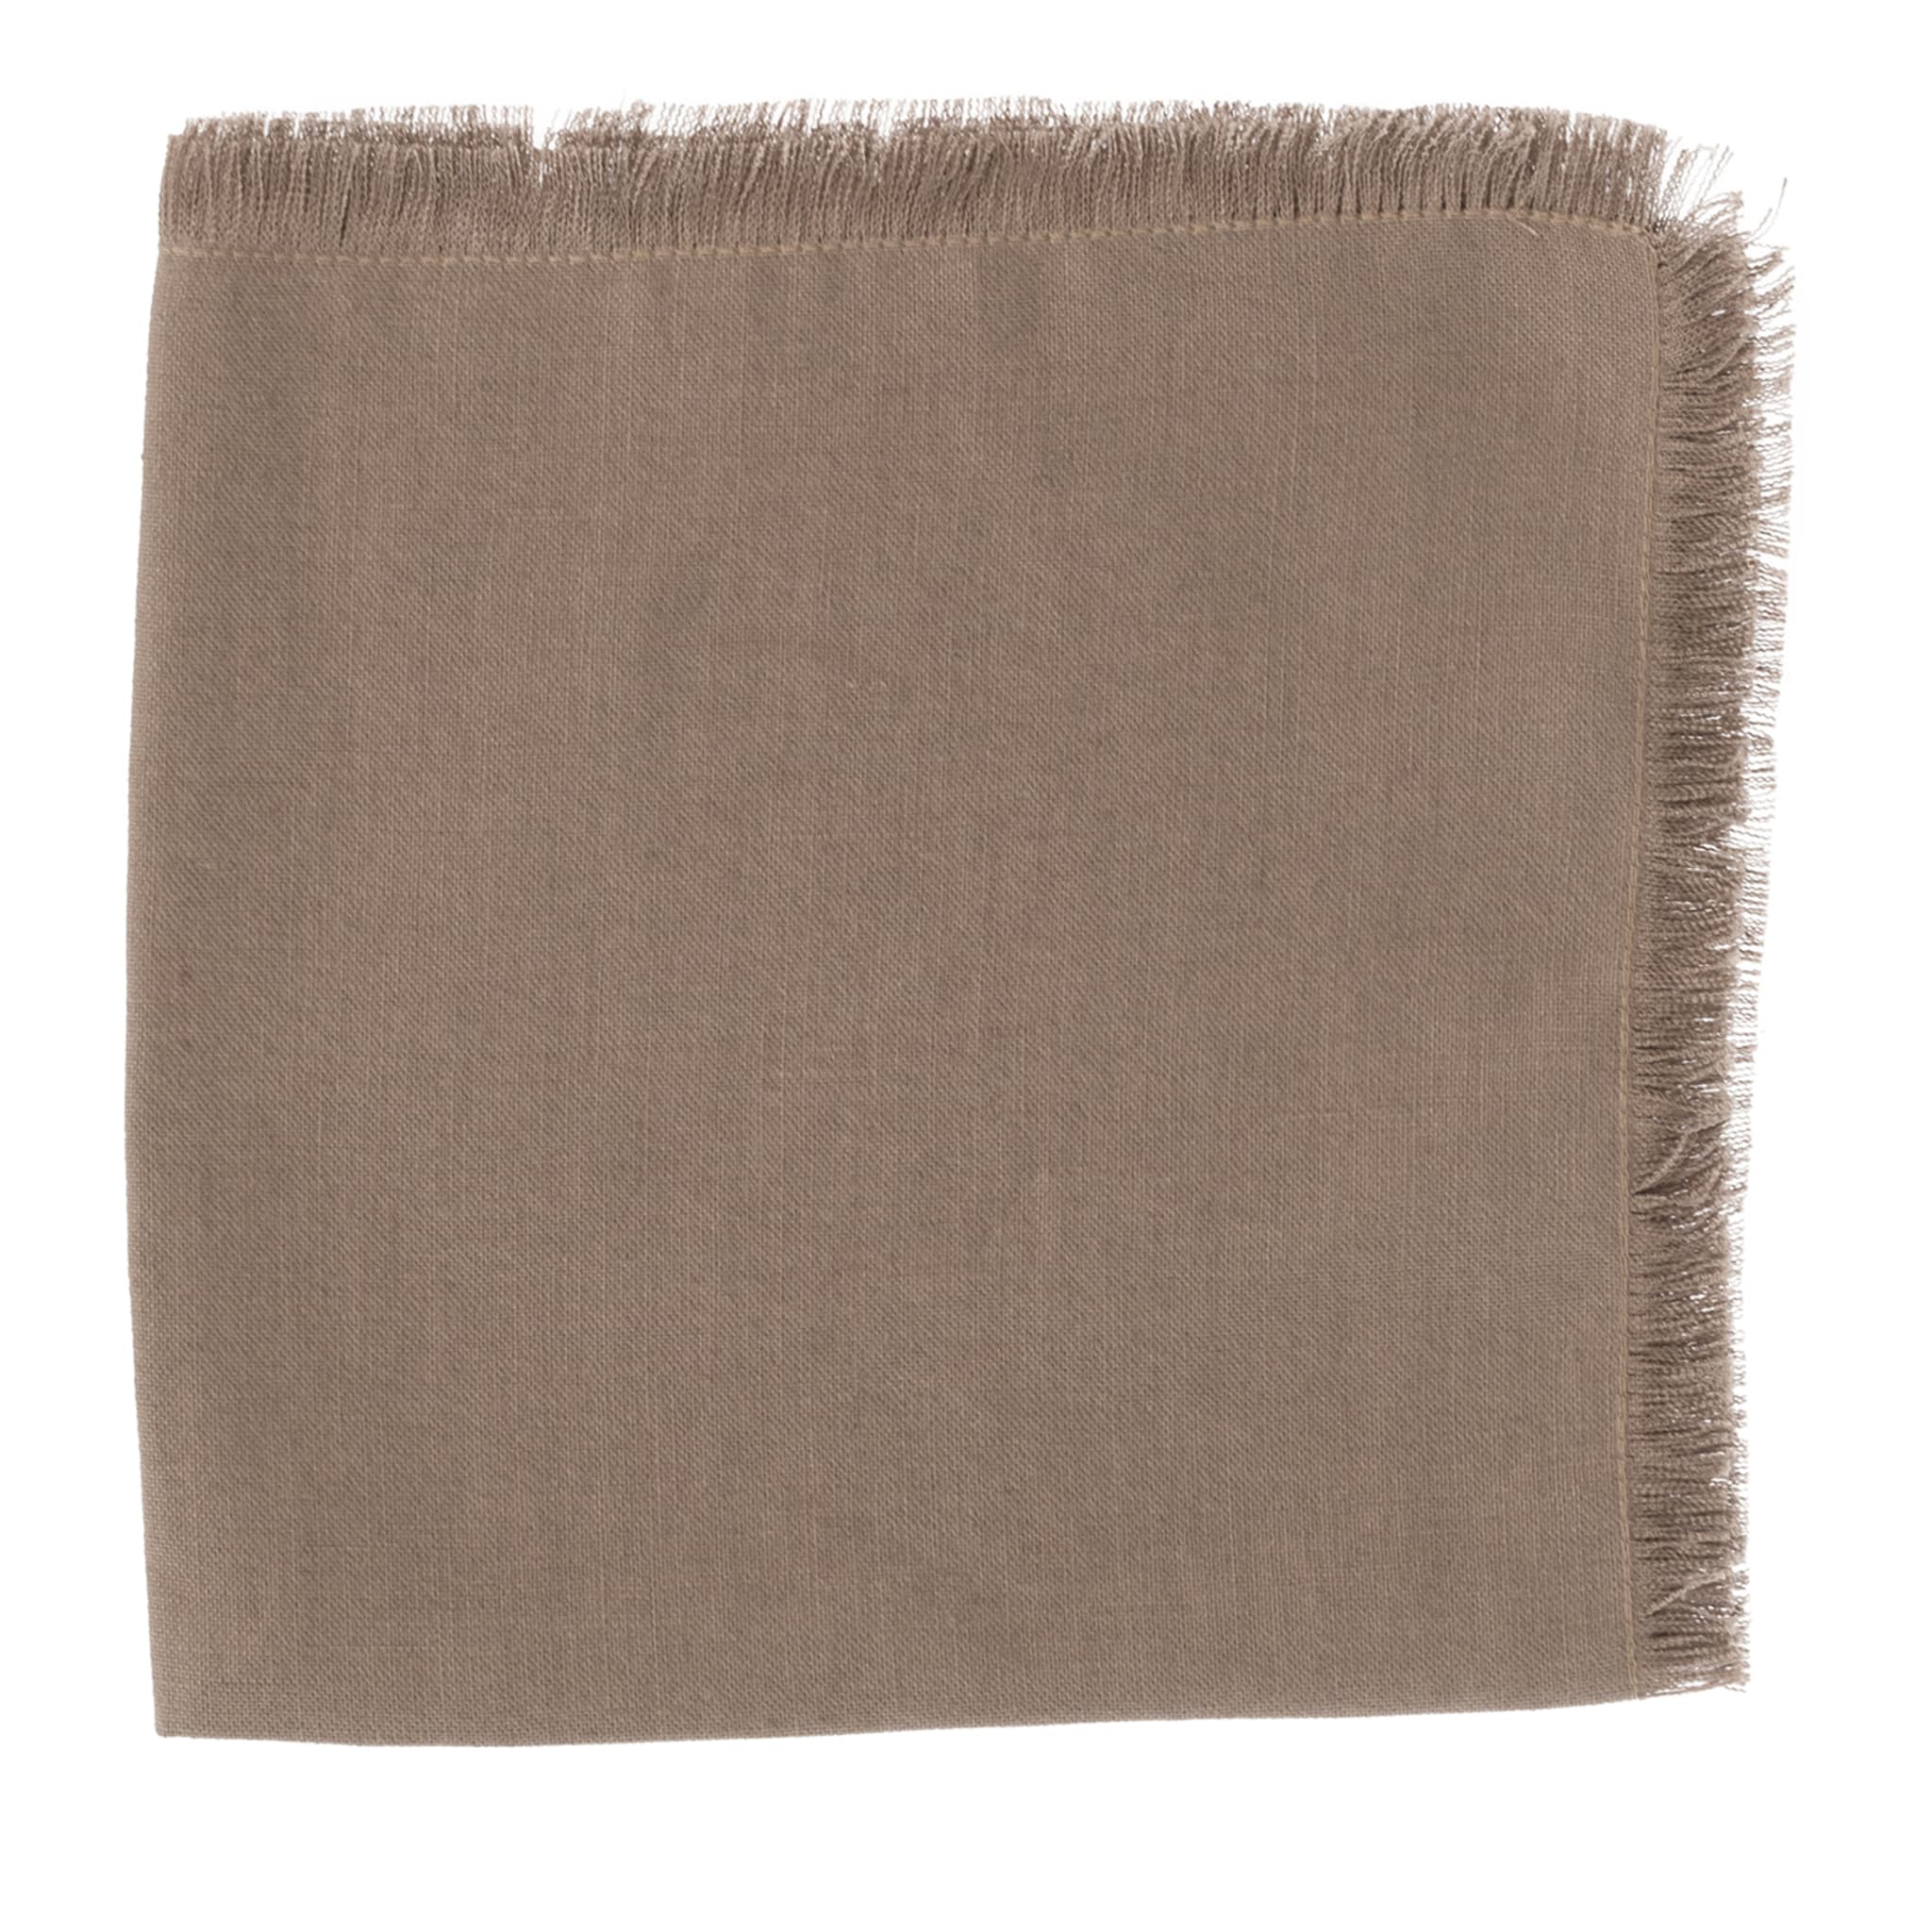 Set of 4 Luxury Hand-Fringed Taupe Pure Linen Napkins - Main view